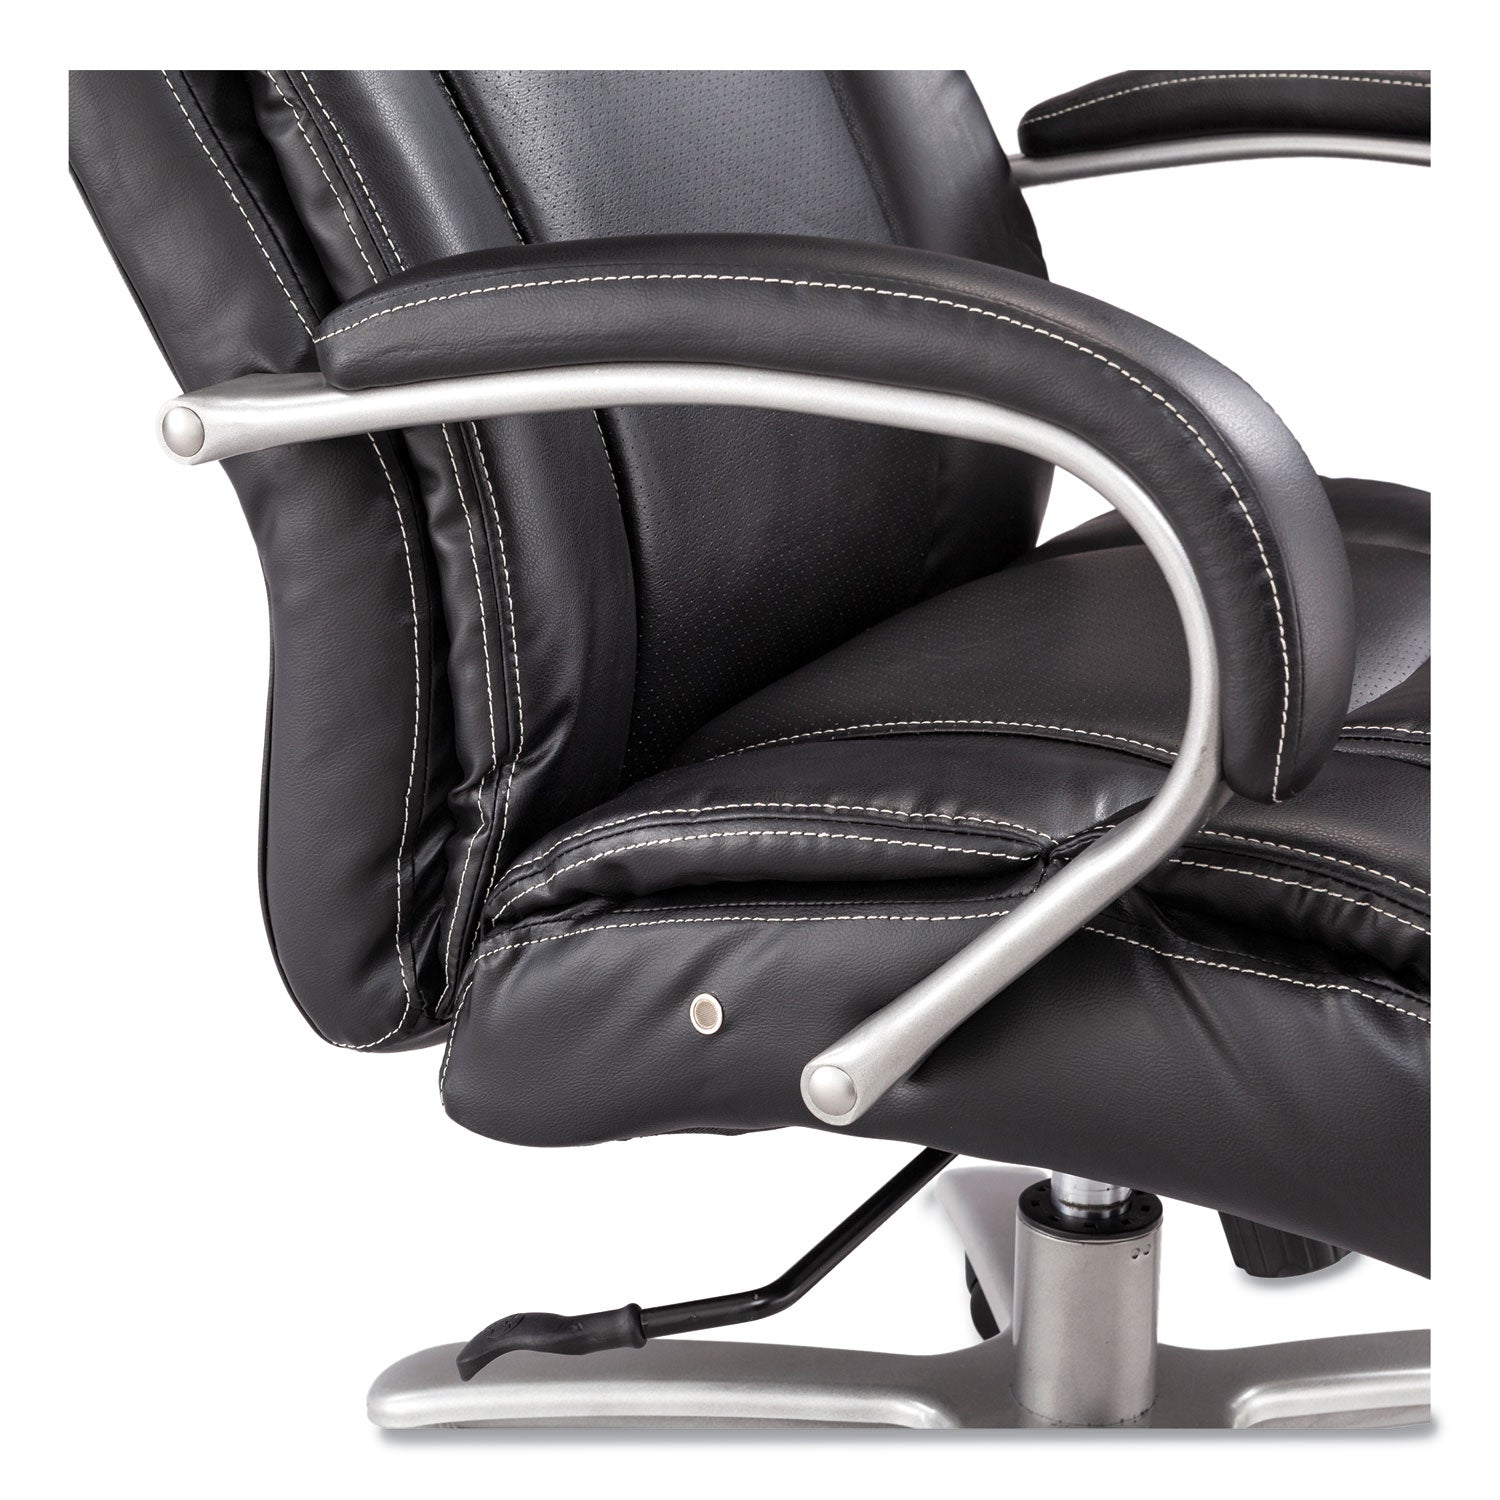 lineage-big&tall-mid-back-task-chair-245-back-max-350lb-195-to-2325-high-black-seatchromeships-in-1-3-business-days_saf3504bl - 2